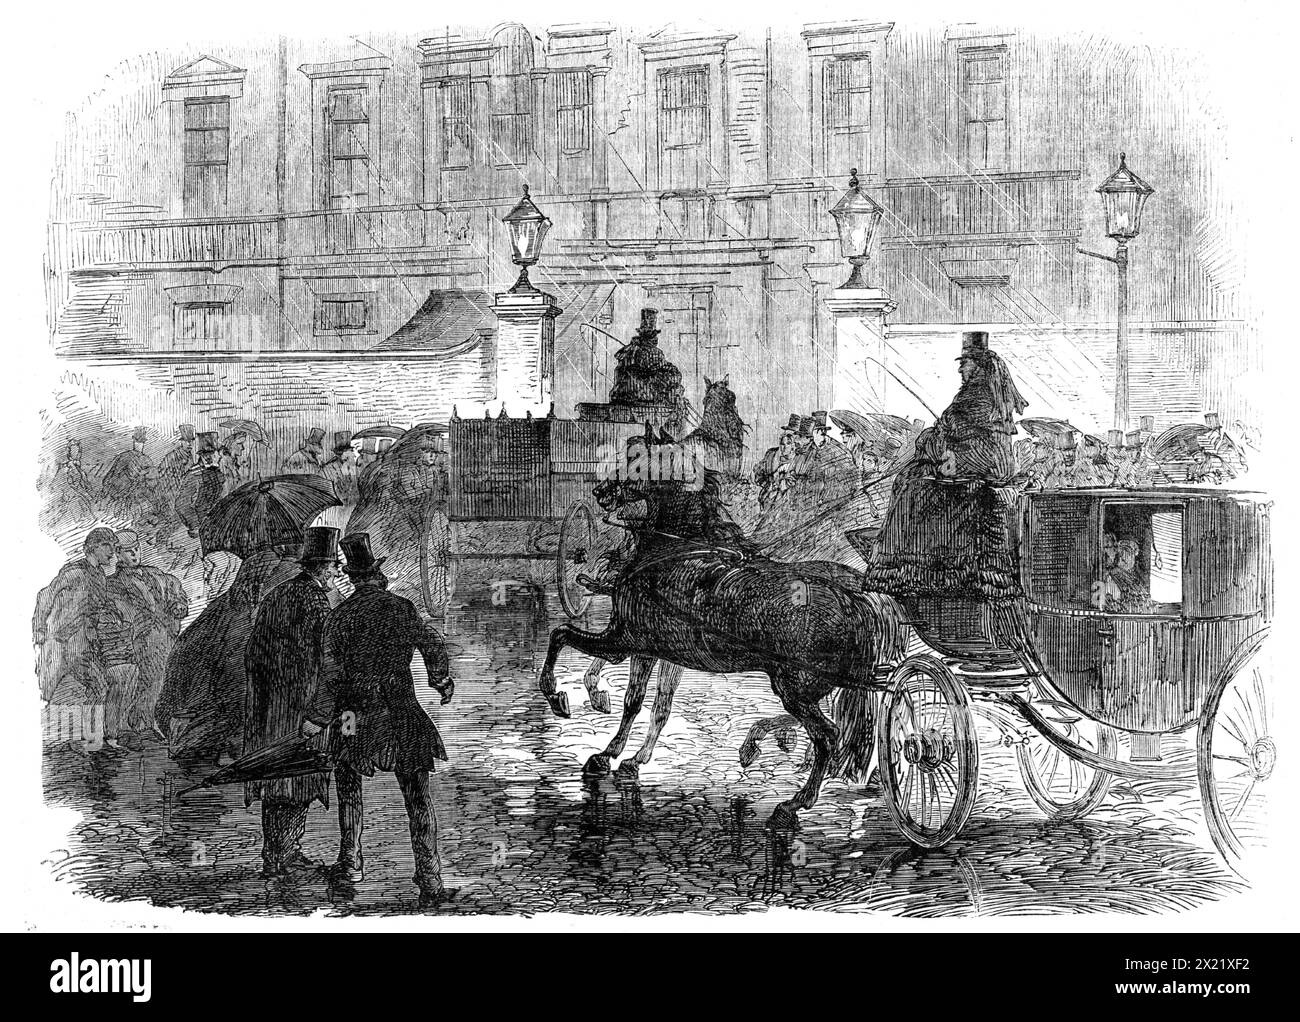 The Funeral of Lord Palmerston: arrival of the hearse at Cambridge House, Piccadilly, 1865. In the evening, '...the body was here received by the nearest surviving kinsman of Lord Palmerston, his sister's son, the Hon. Henry Sulivan, Rector of Yoxall, near Lichfield; and by the Hon. Evelyn Ashley, late his private secretary. It was laid out in the dining-room, with no other ornament than a board with sable plumes laid at the head. Only a very few of Lord Palmerston's most intimate friends, and, two or three days afterwards, Dr. Stanley, the Dean of Westminster, were admitted to see the face of Stock Photo